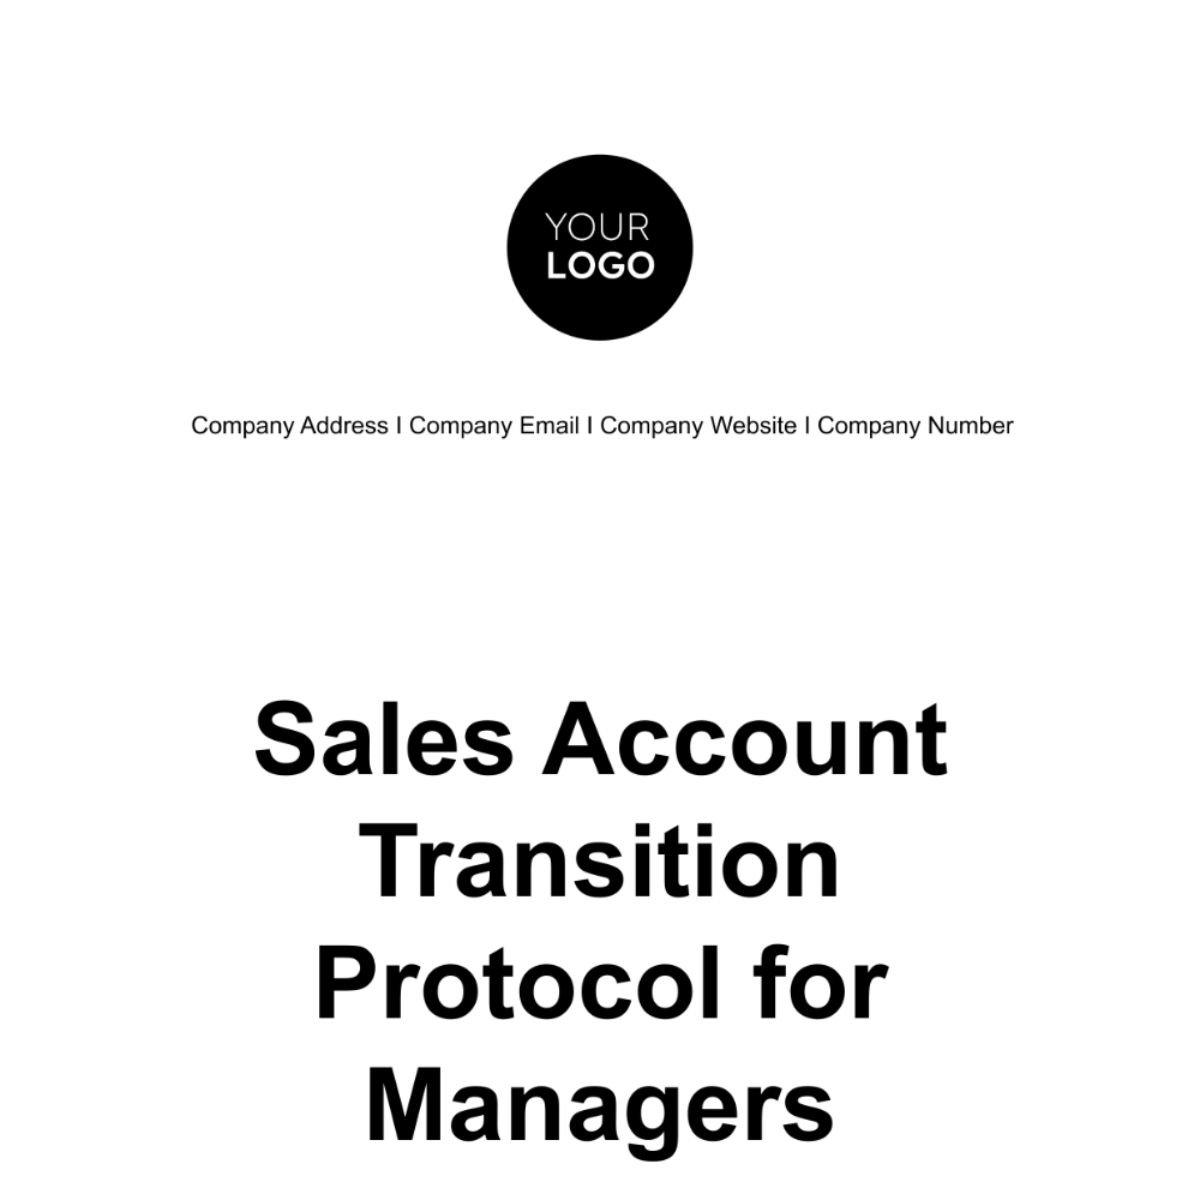 Sales Account Transition Protocol for Managers Template